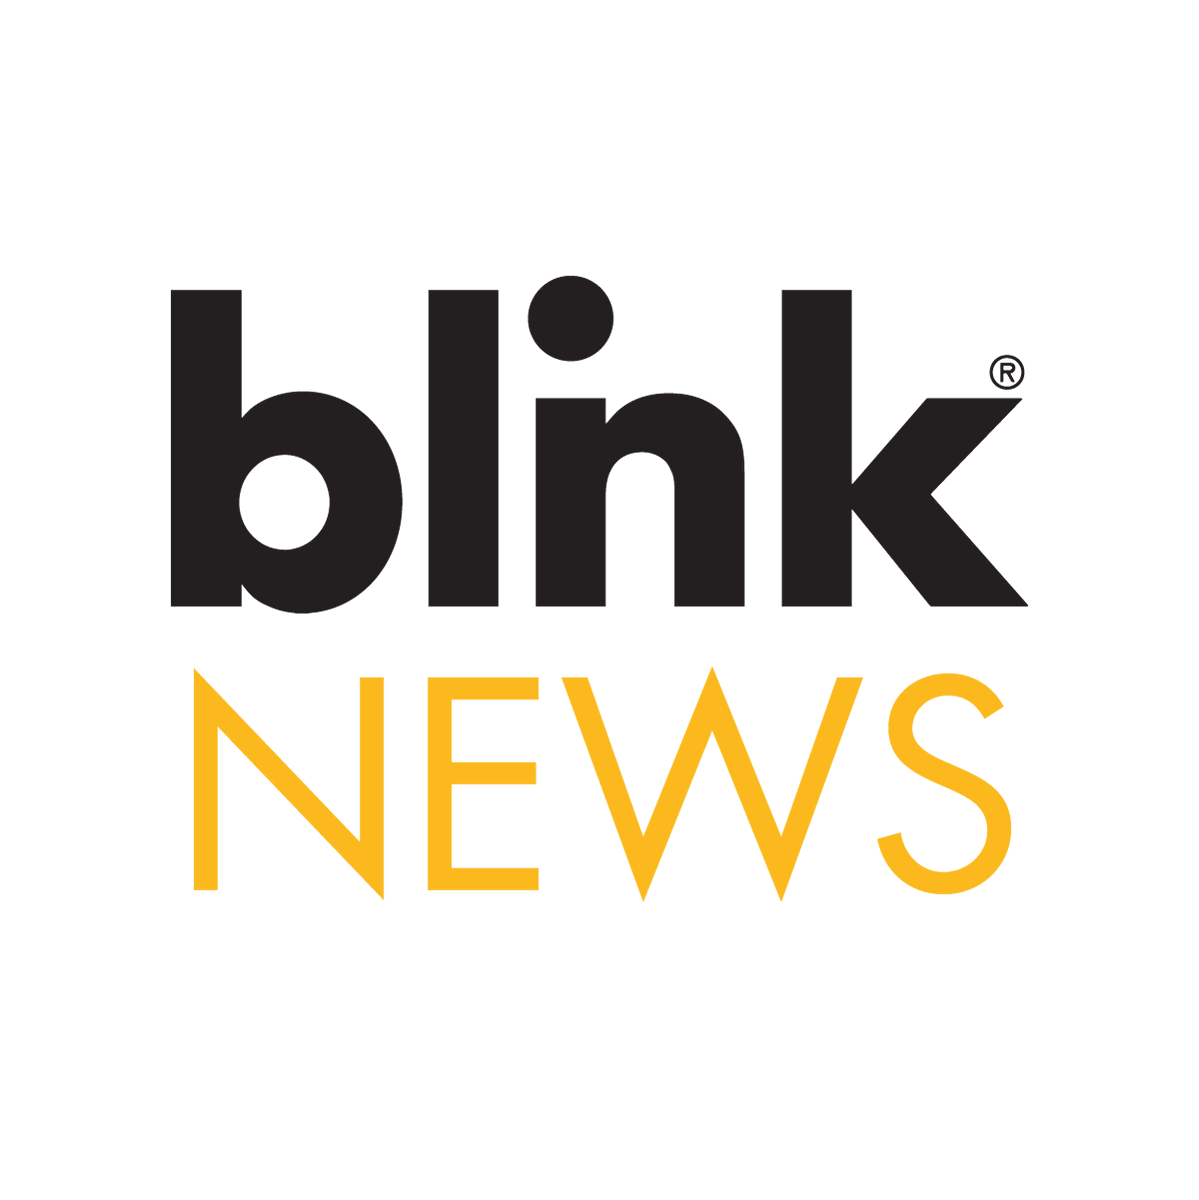 Blink Charging UK has teamed up with one of the UK's largest couriers EVRi to support their #FleetElectrification. Read on to find out more about their journey. #Blink #ElectricDeliveries #ElectricCouriers #EV ow.ly/FRLz50Rn8K9